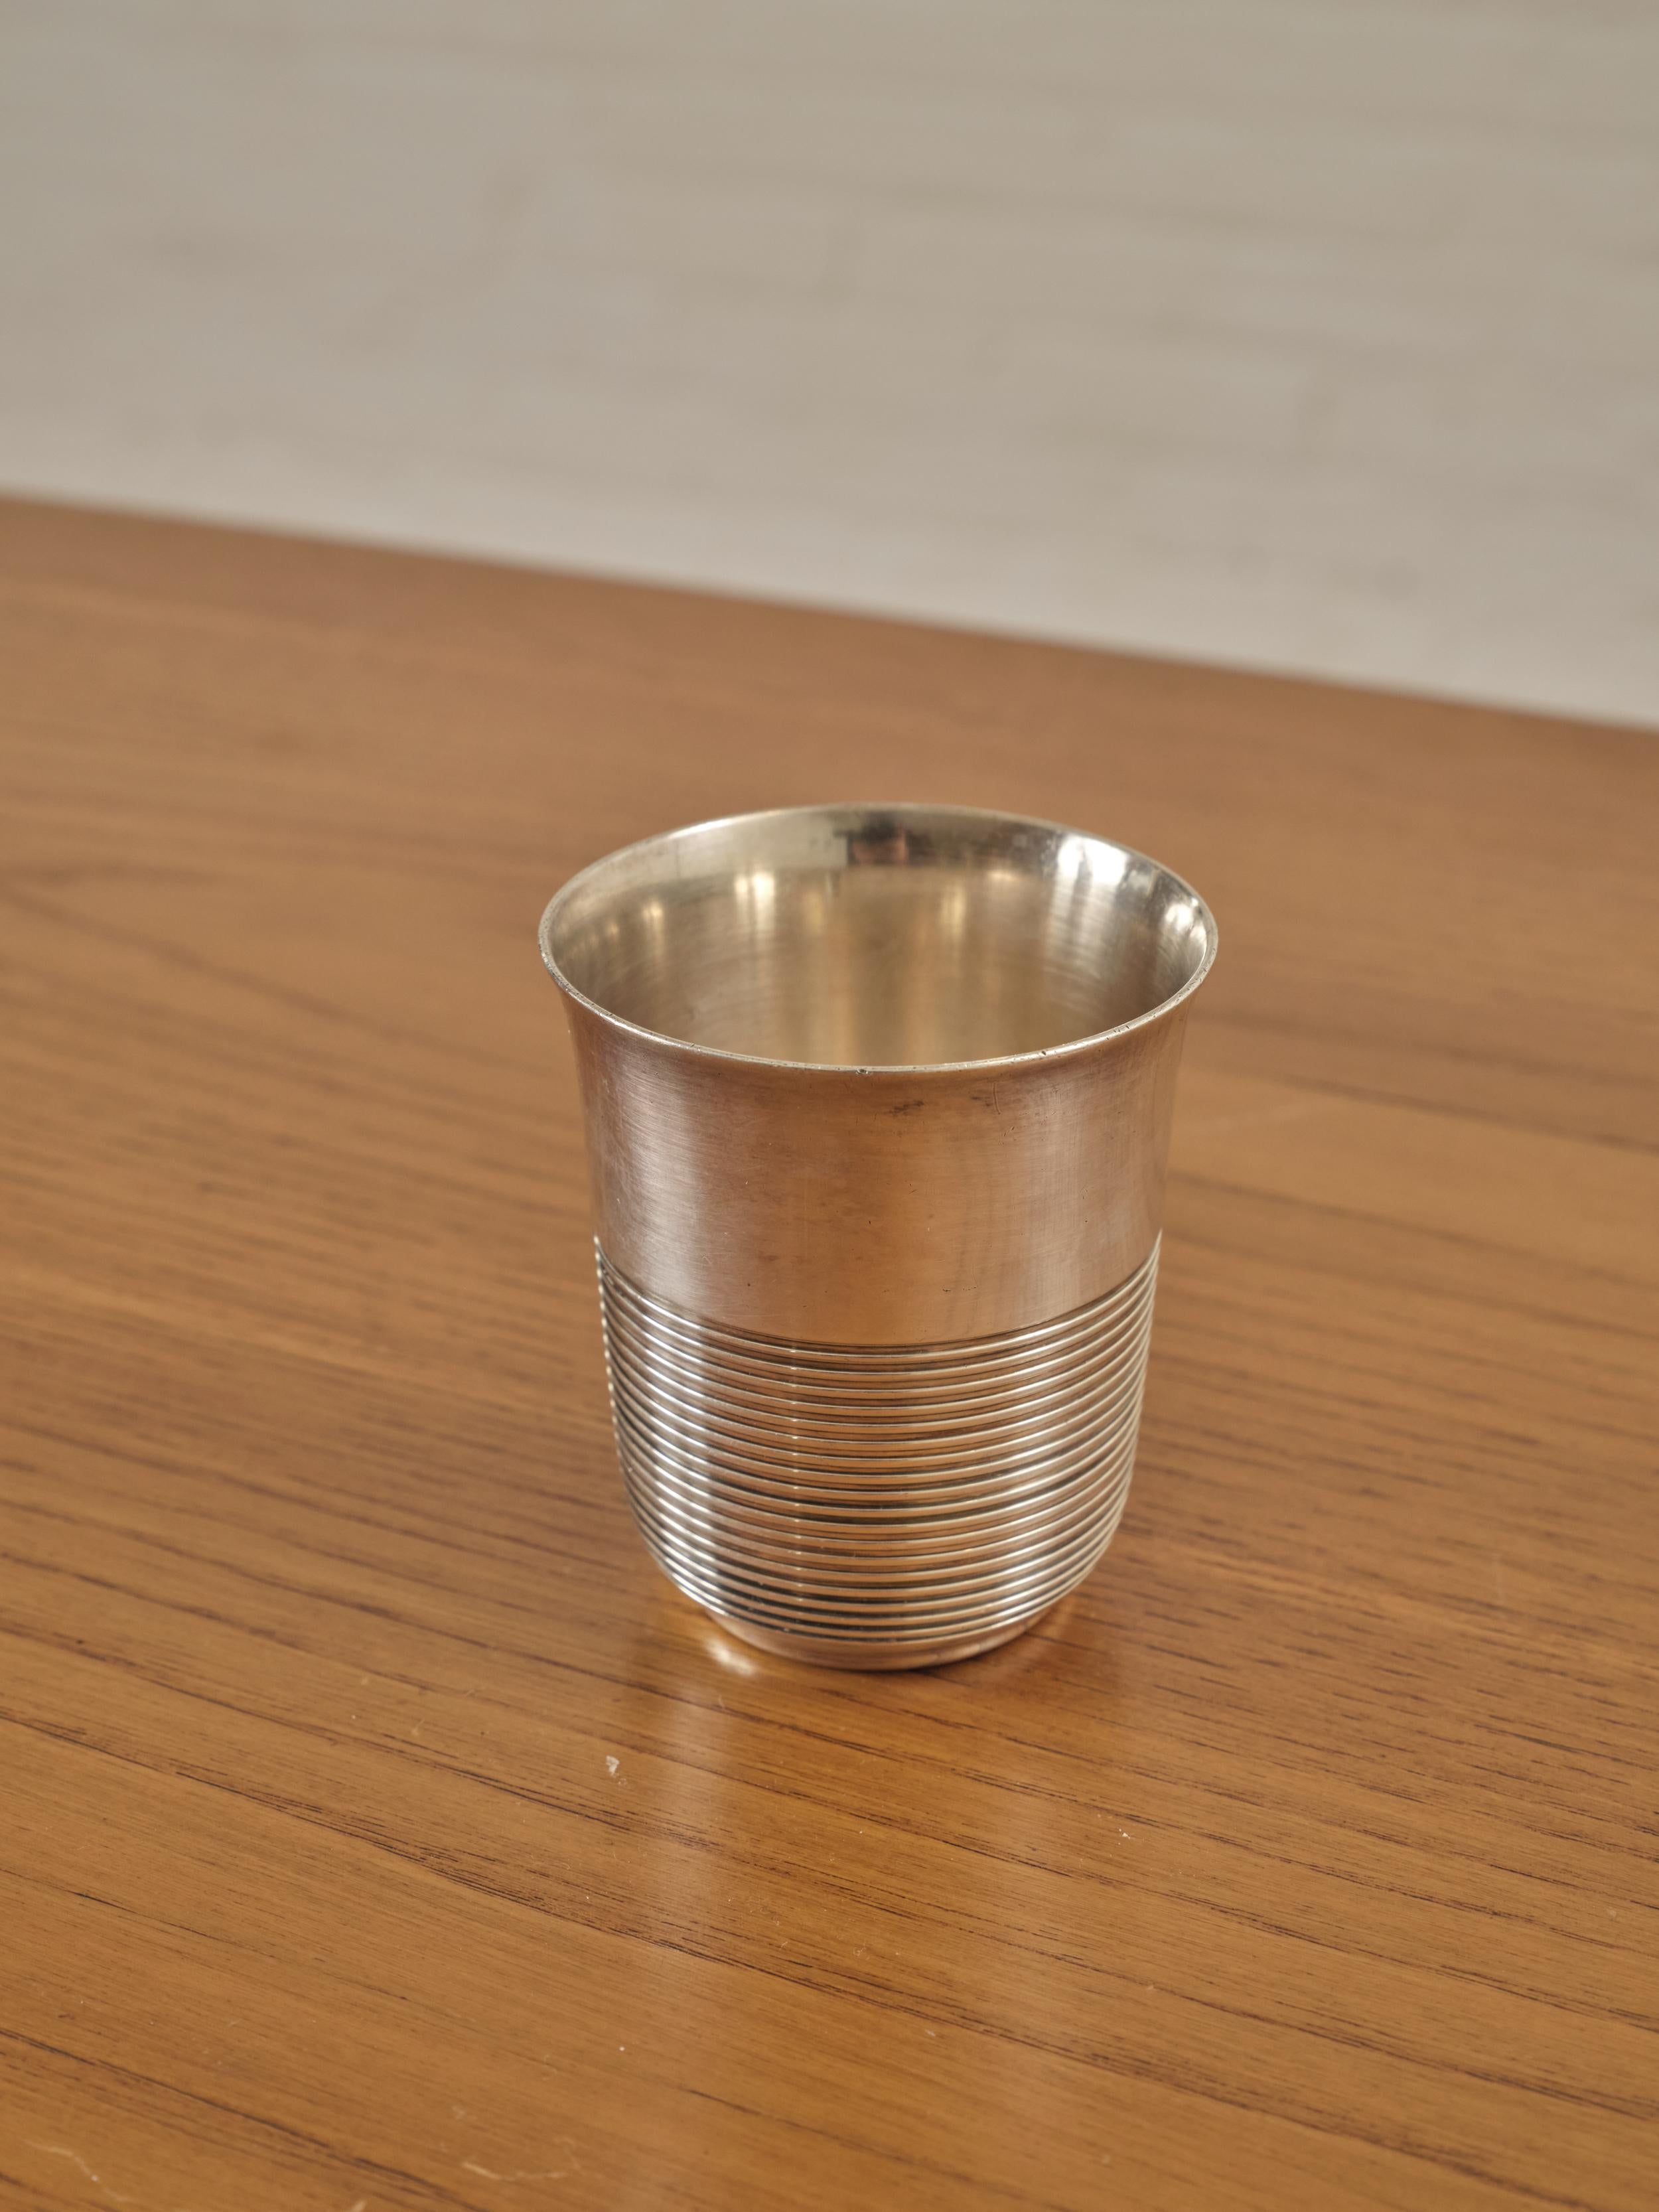 Pencil Cup Holder by Luc Lanel For Christofle

About Luc Lanel:

The designer and ceramist had received his training at the École des arts décoratifs in Paris. He worked mainly with silver or silver-plated metals as well as bronze for the companies